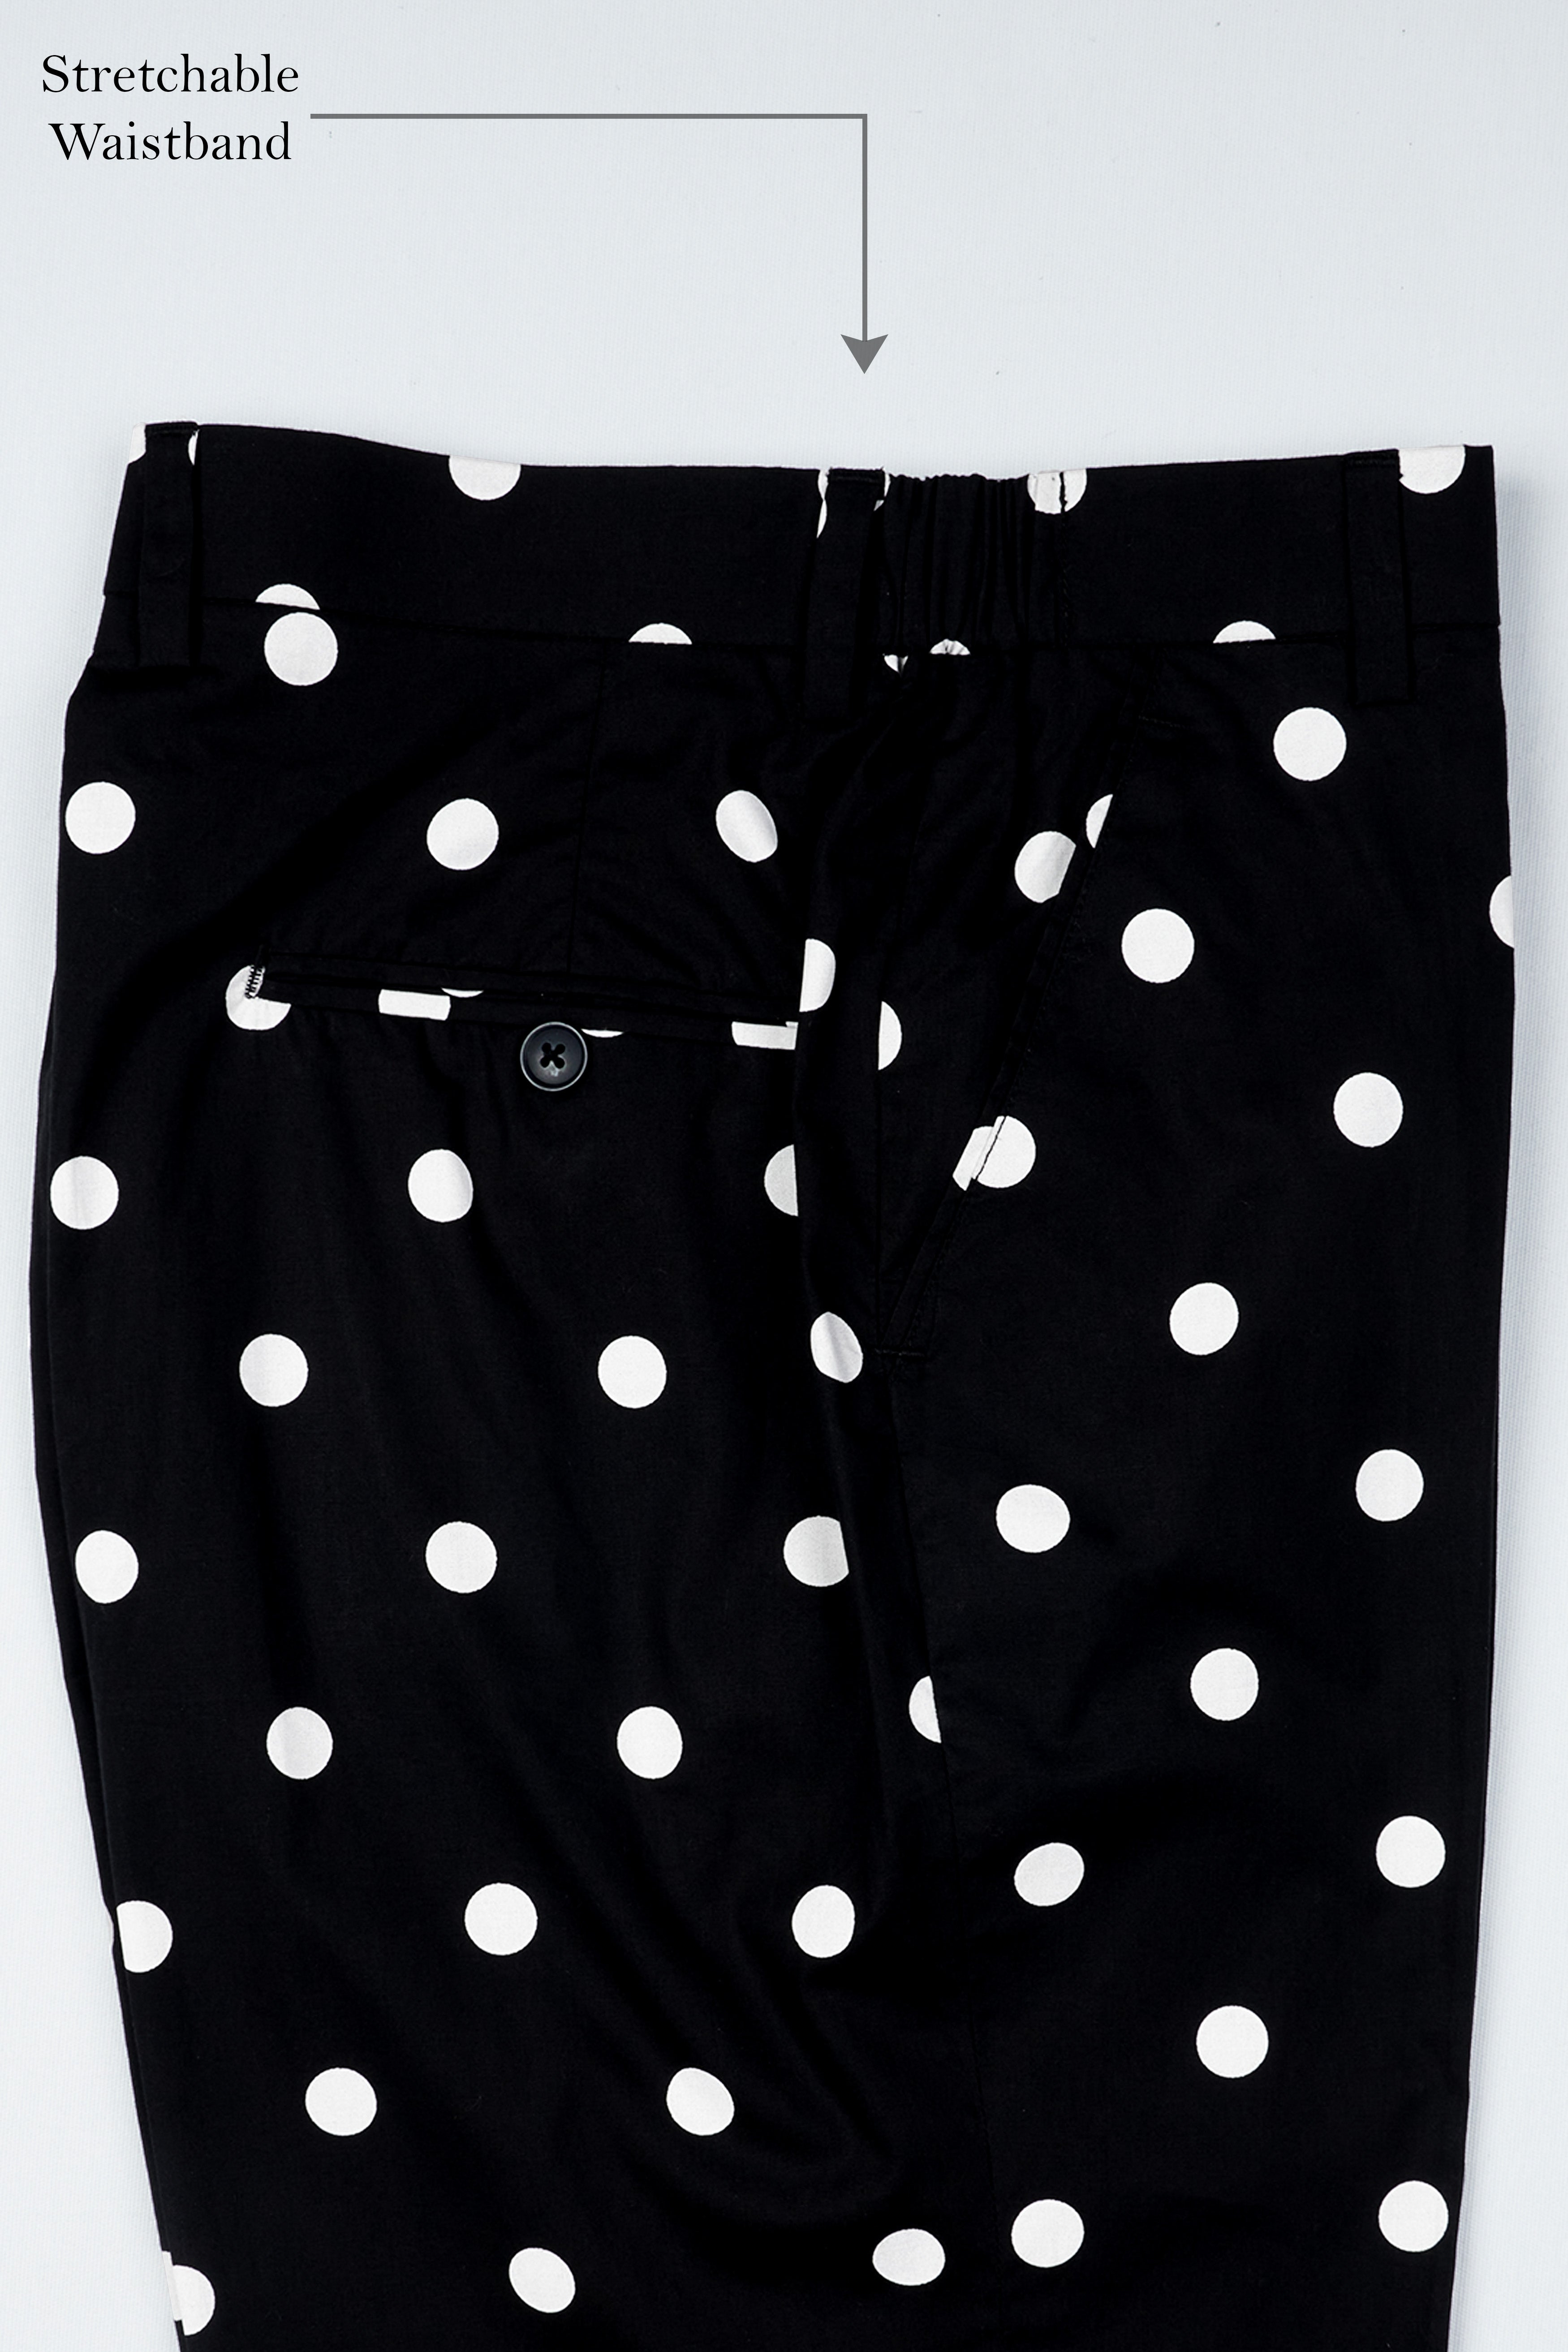 Jade Black with White Polka Dotted Premium Cotton Pant T2844-SW-28, T2844-SW-30, T2844-SW-32, T2844-SW-34, T2844-SW-36, T2844-SW-38, T2844-SW-40, T2844-SW-42, T2844-SW-44